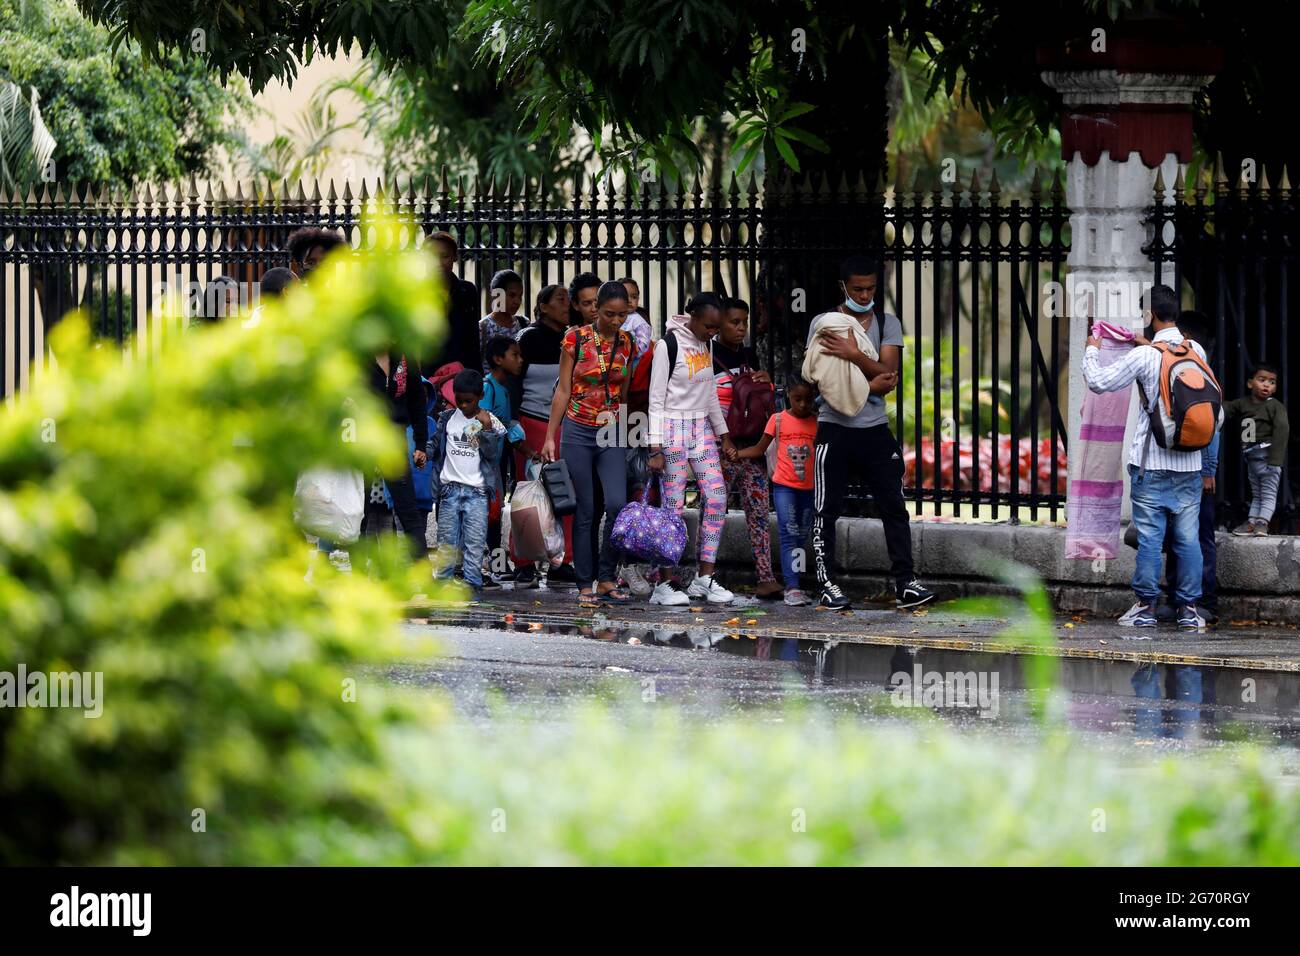 Residents leave their homes in the COTA 905 neighborhood during armed  confrontations with members of the Koki criminal gang in Caracas, Venezuela  July 9, 2021. REUTERS/Leonardo Fernandez Viloria Stock Photo - Alamy